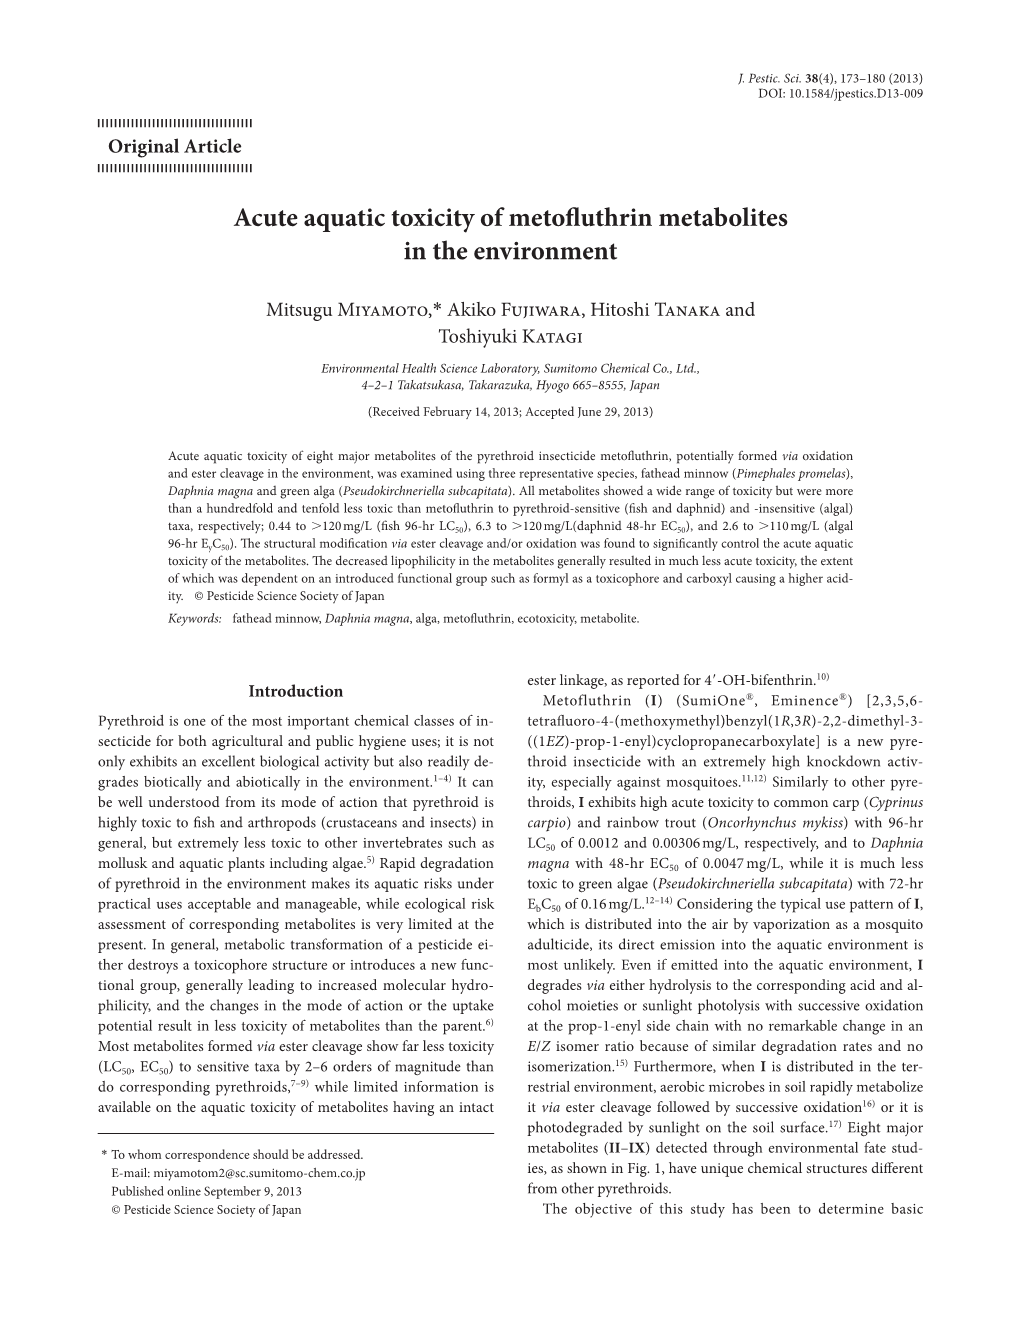 Acute Aquatic Toxicity of Metofluthrin Metabolites in the Environment